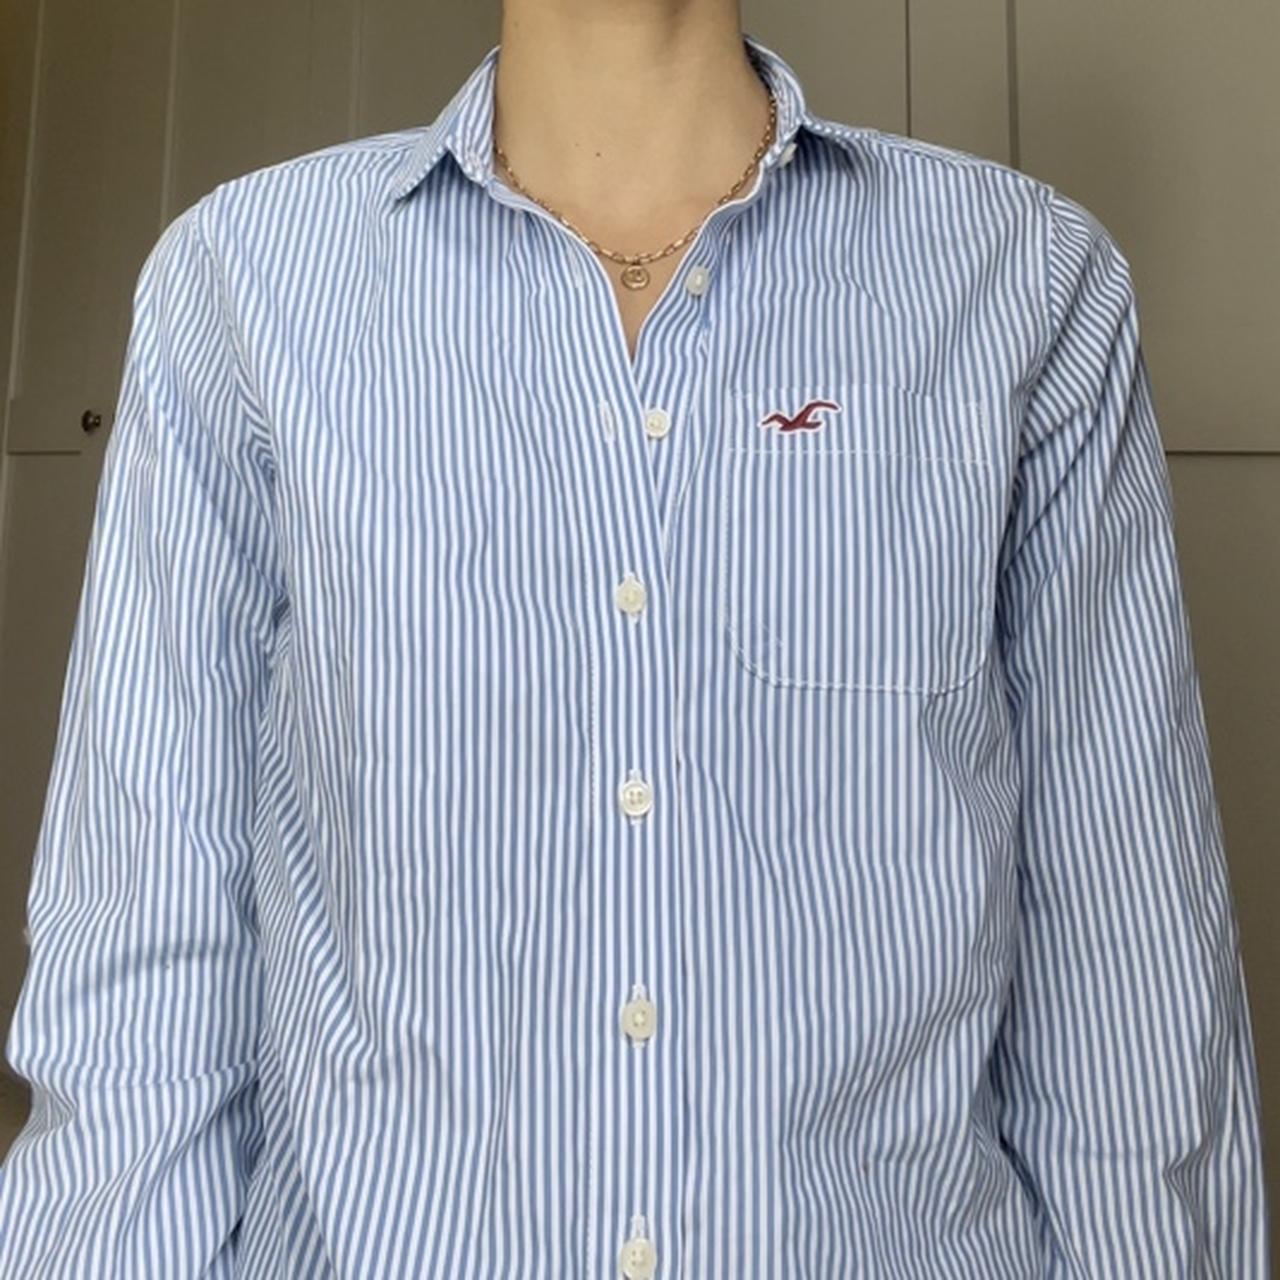 Hollister blue striped button up , ☆ PLEASE CHECK